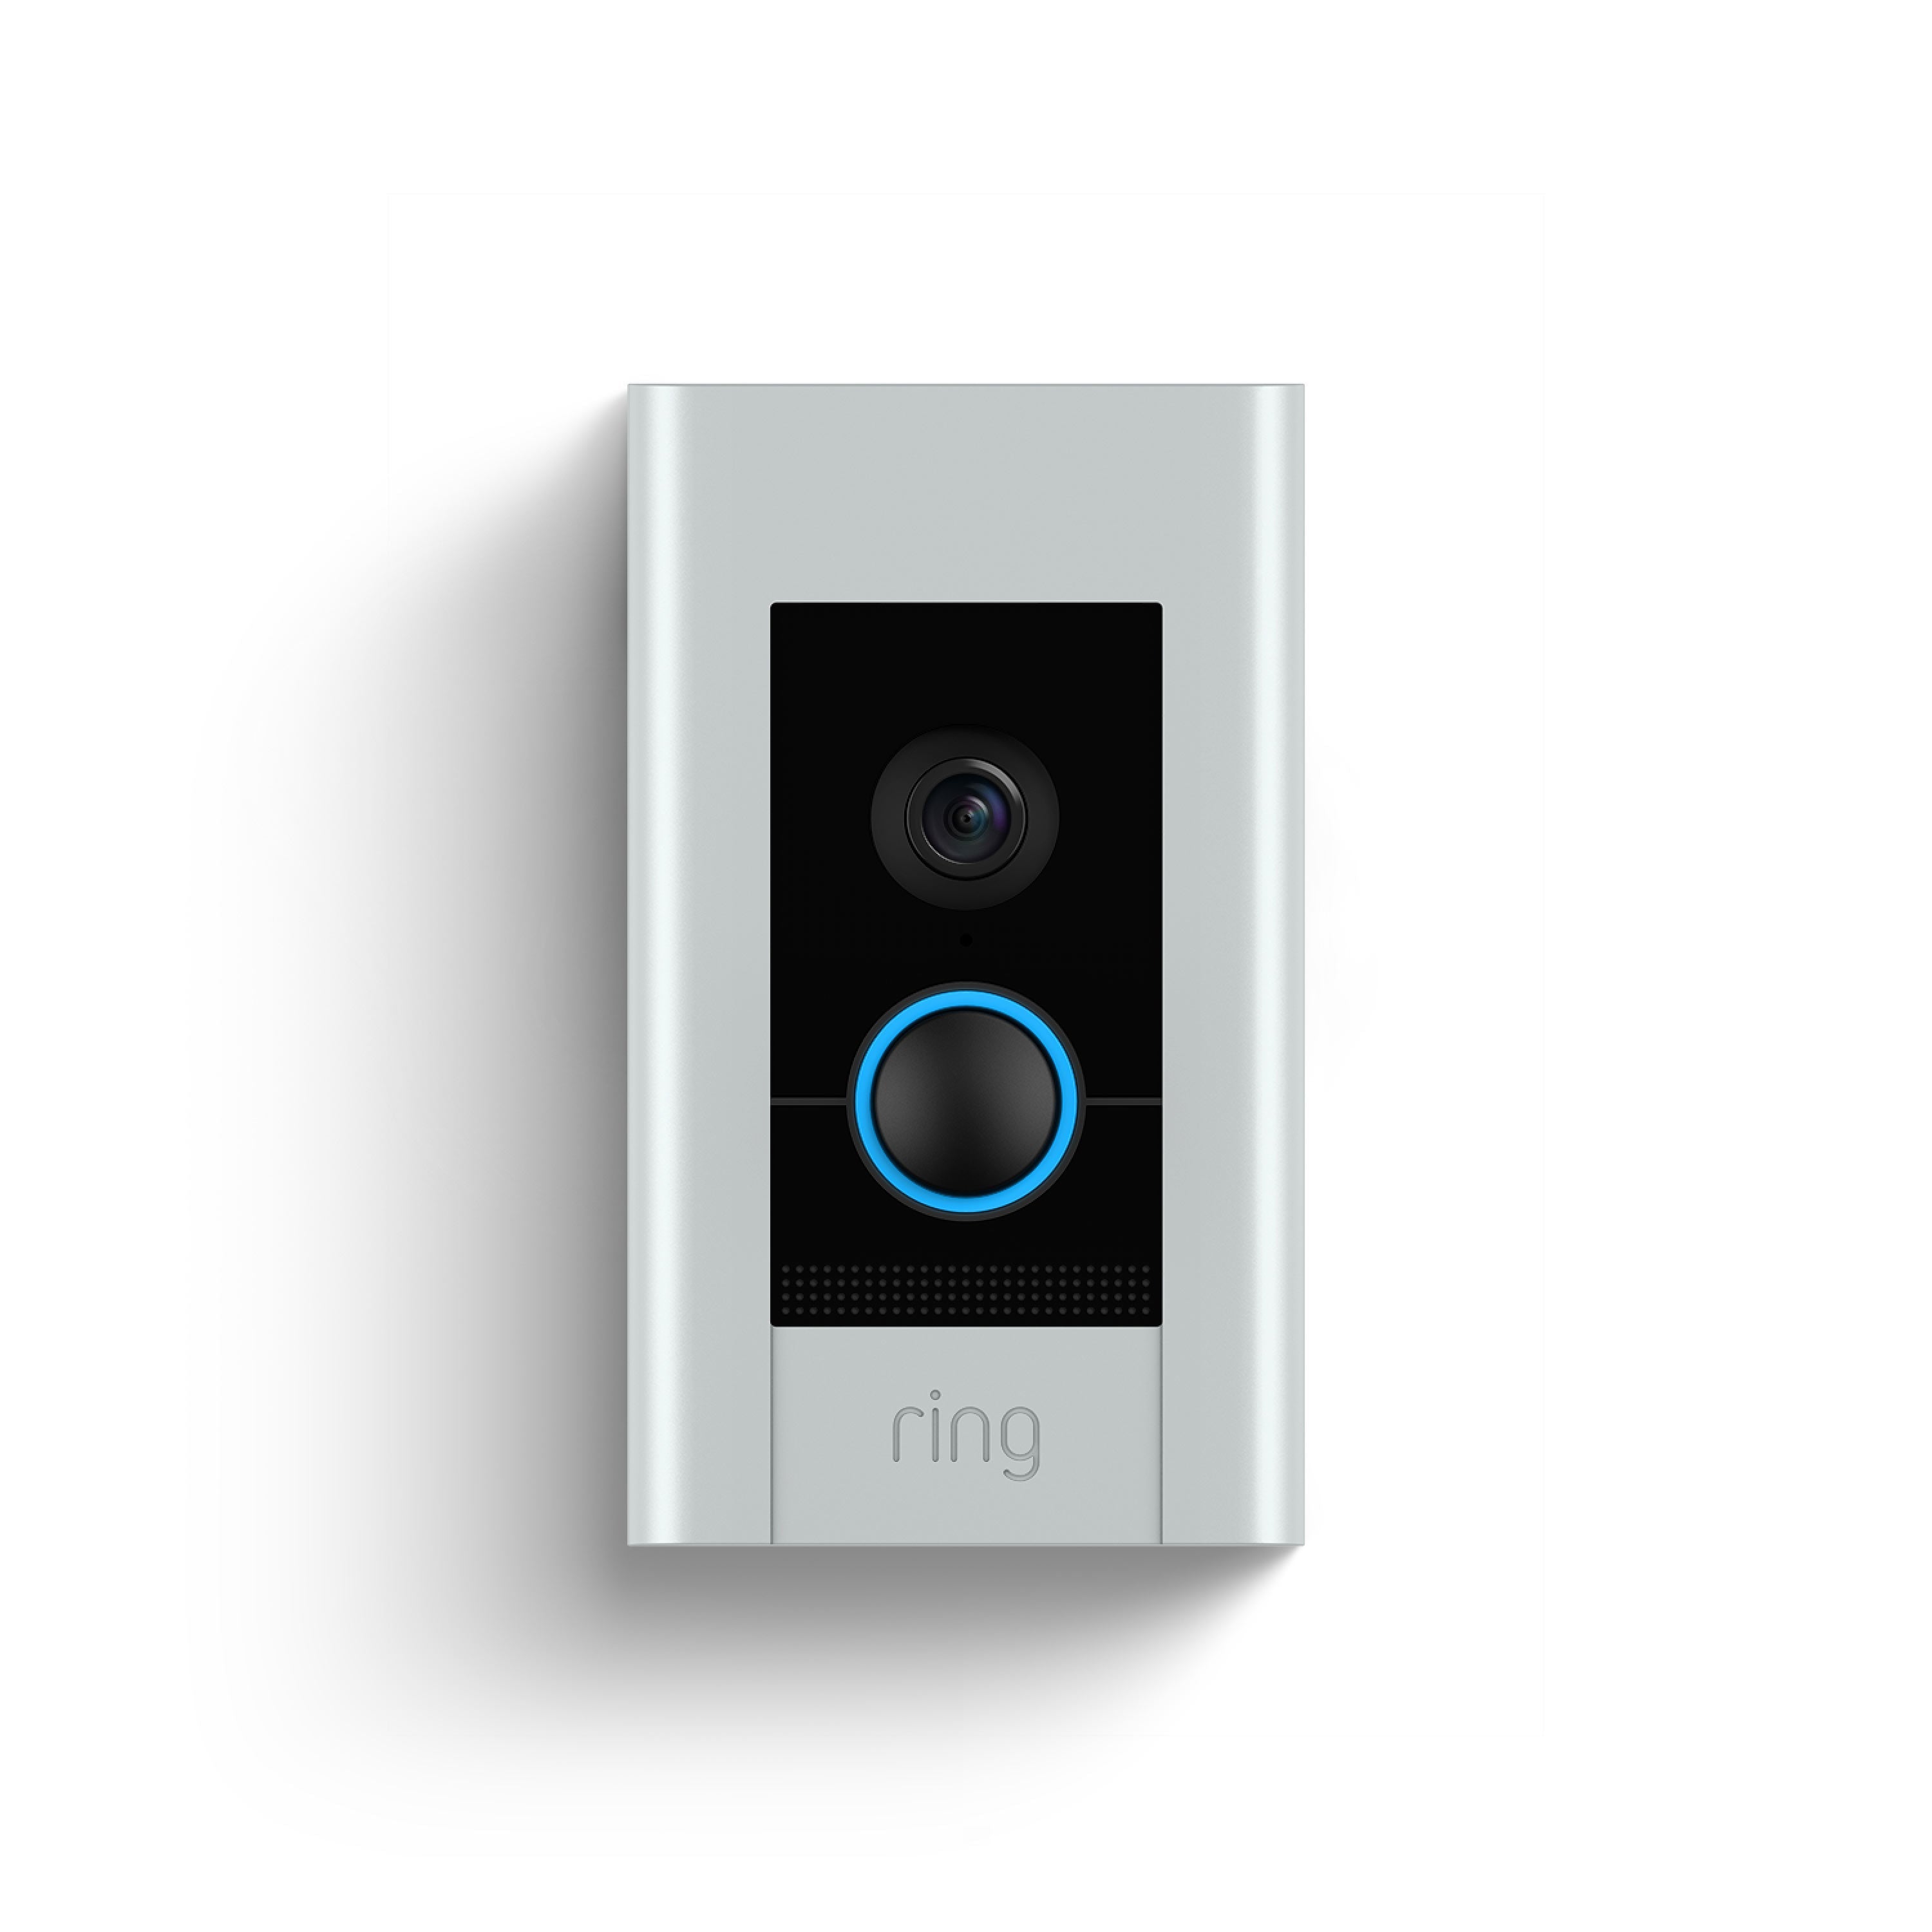 7 Reasons To Buy A Ring Doorbell For Your Home This Year